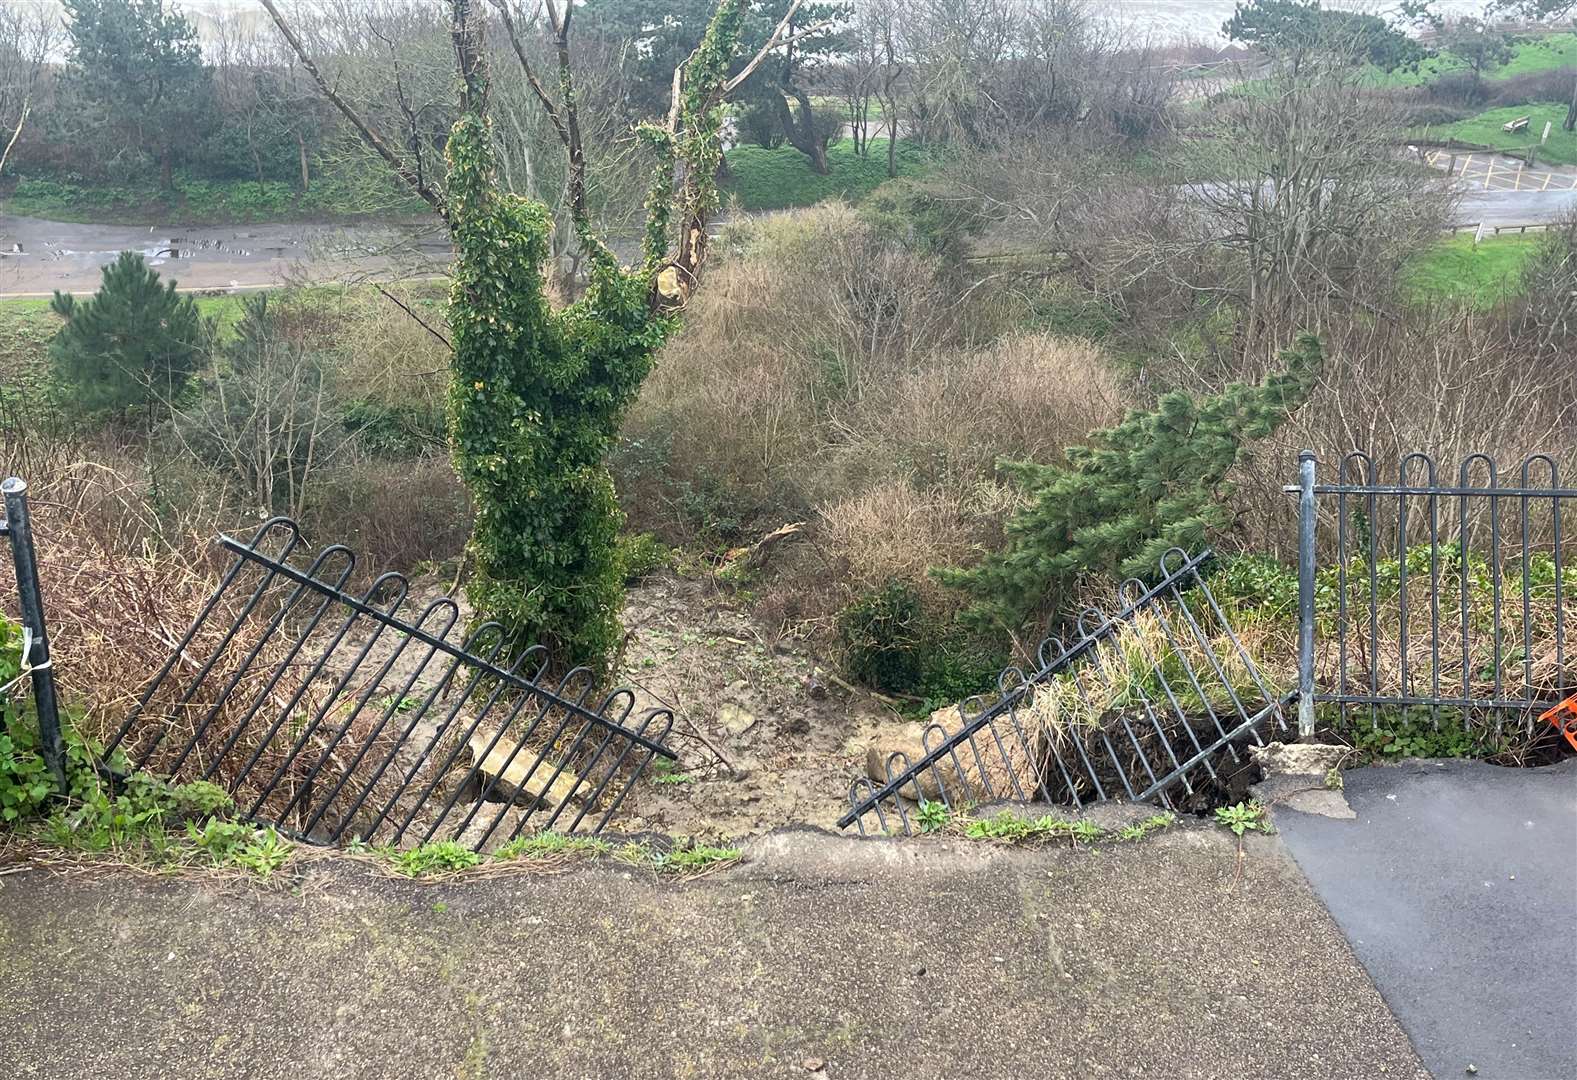 The previous closure on Maderia Walk remains in place, following a landslide that damaged part of the railings.